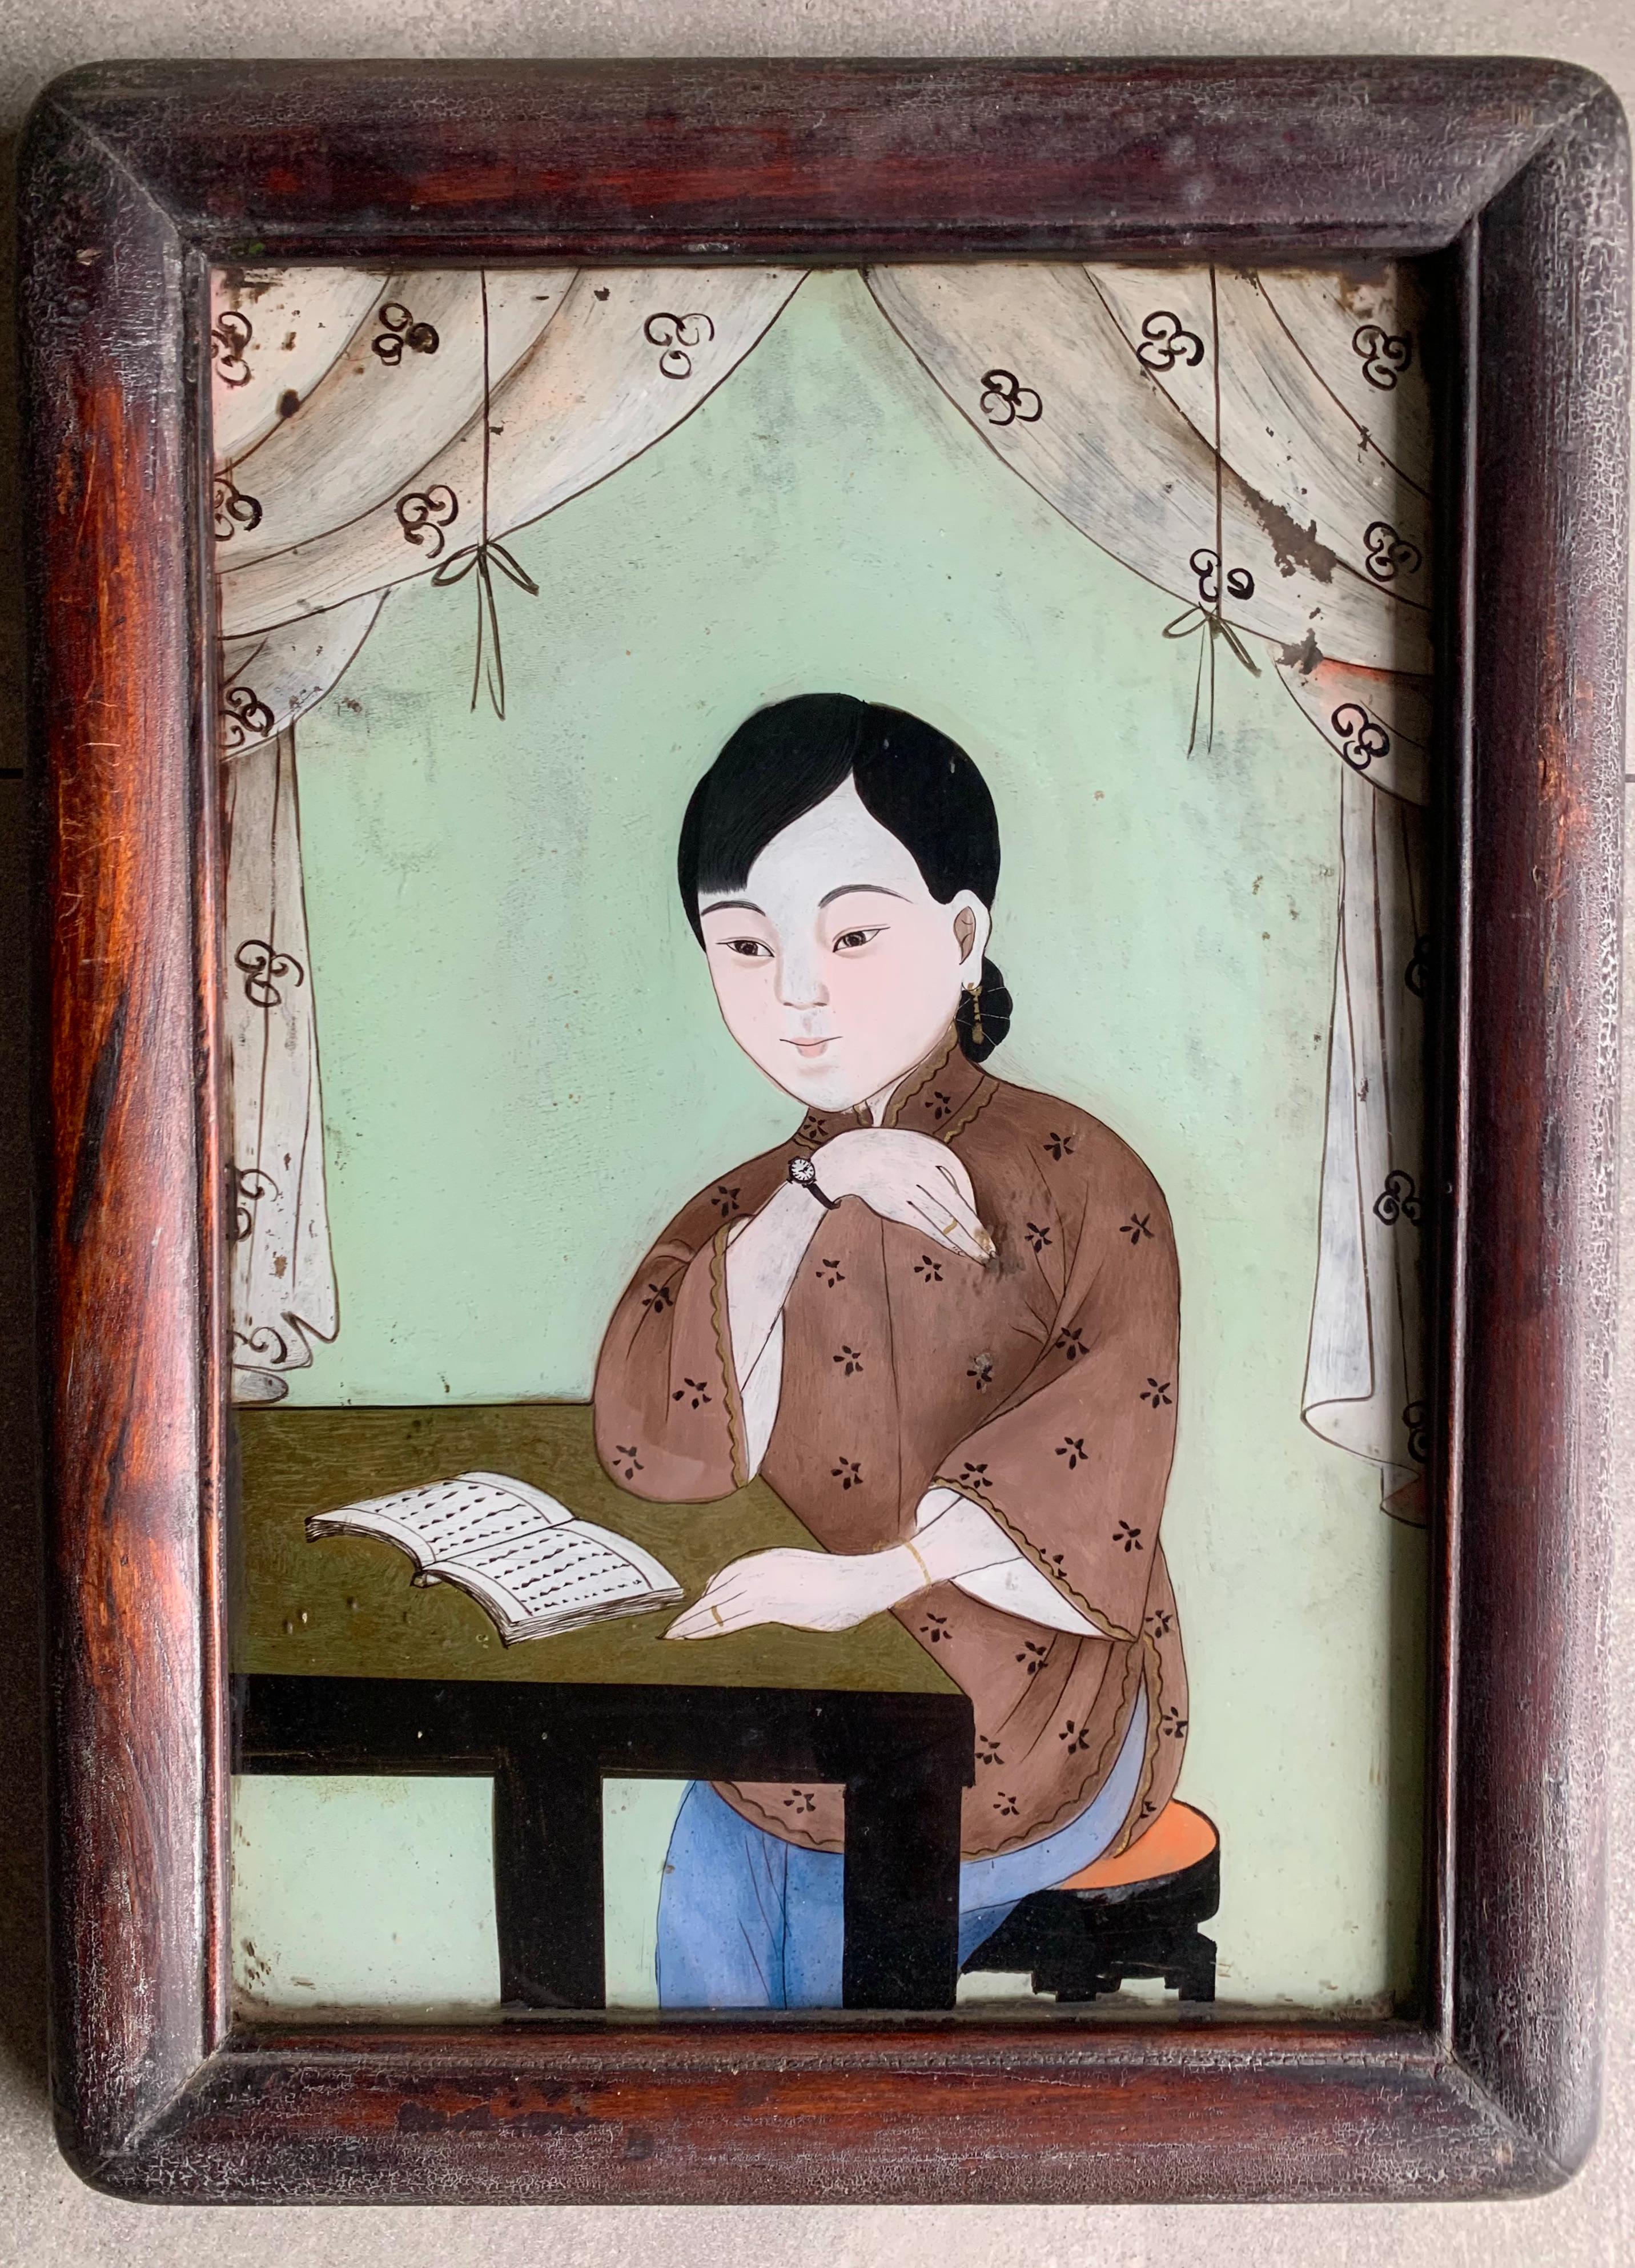 This pair of Chinese portraits depicting young women were painted using a reverse glass painting technique. Painting in reverse on the opposite side of a piece of glass meant the painter had to work in reverse. They still possess much of their